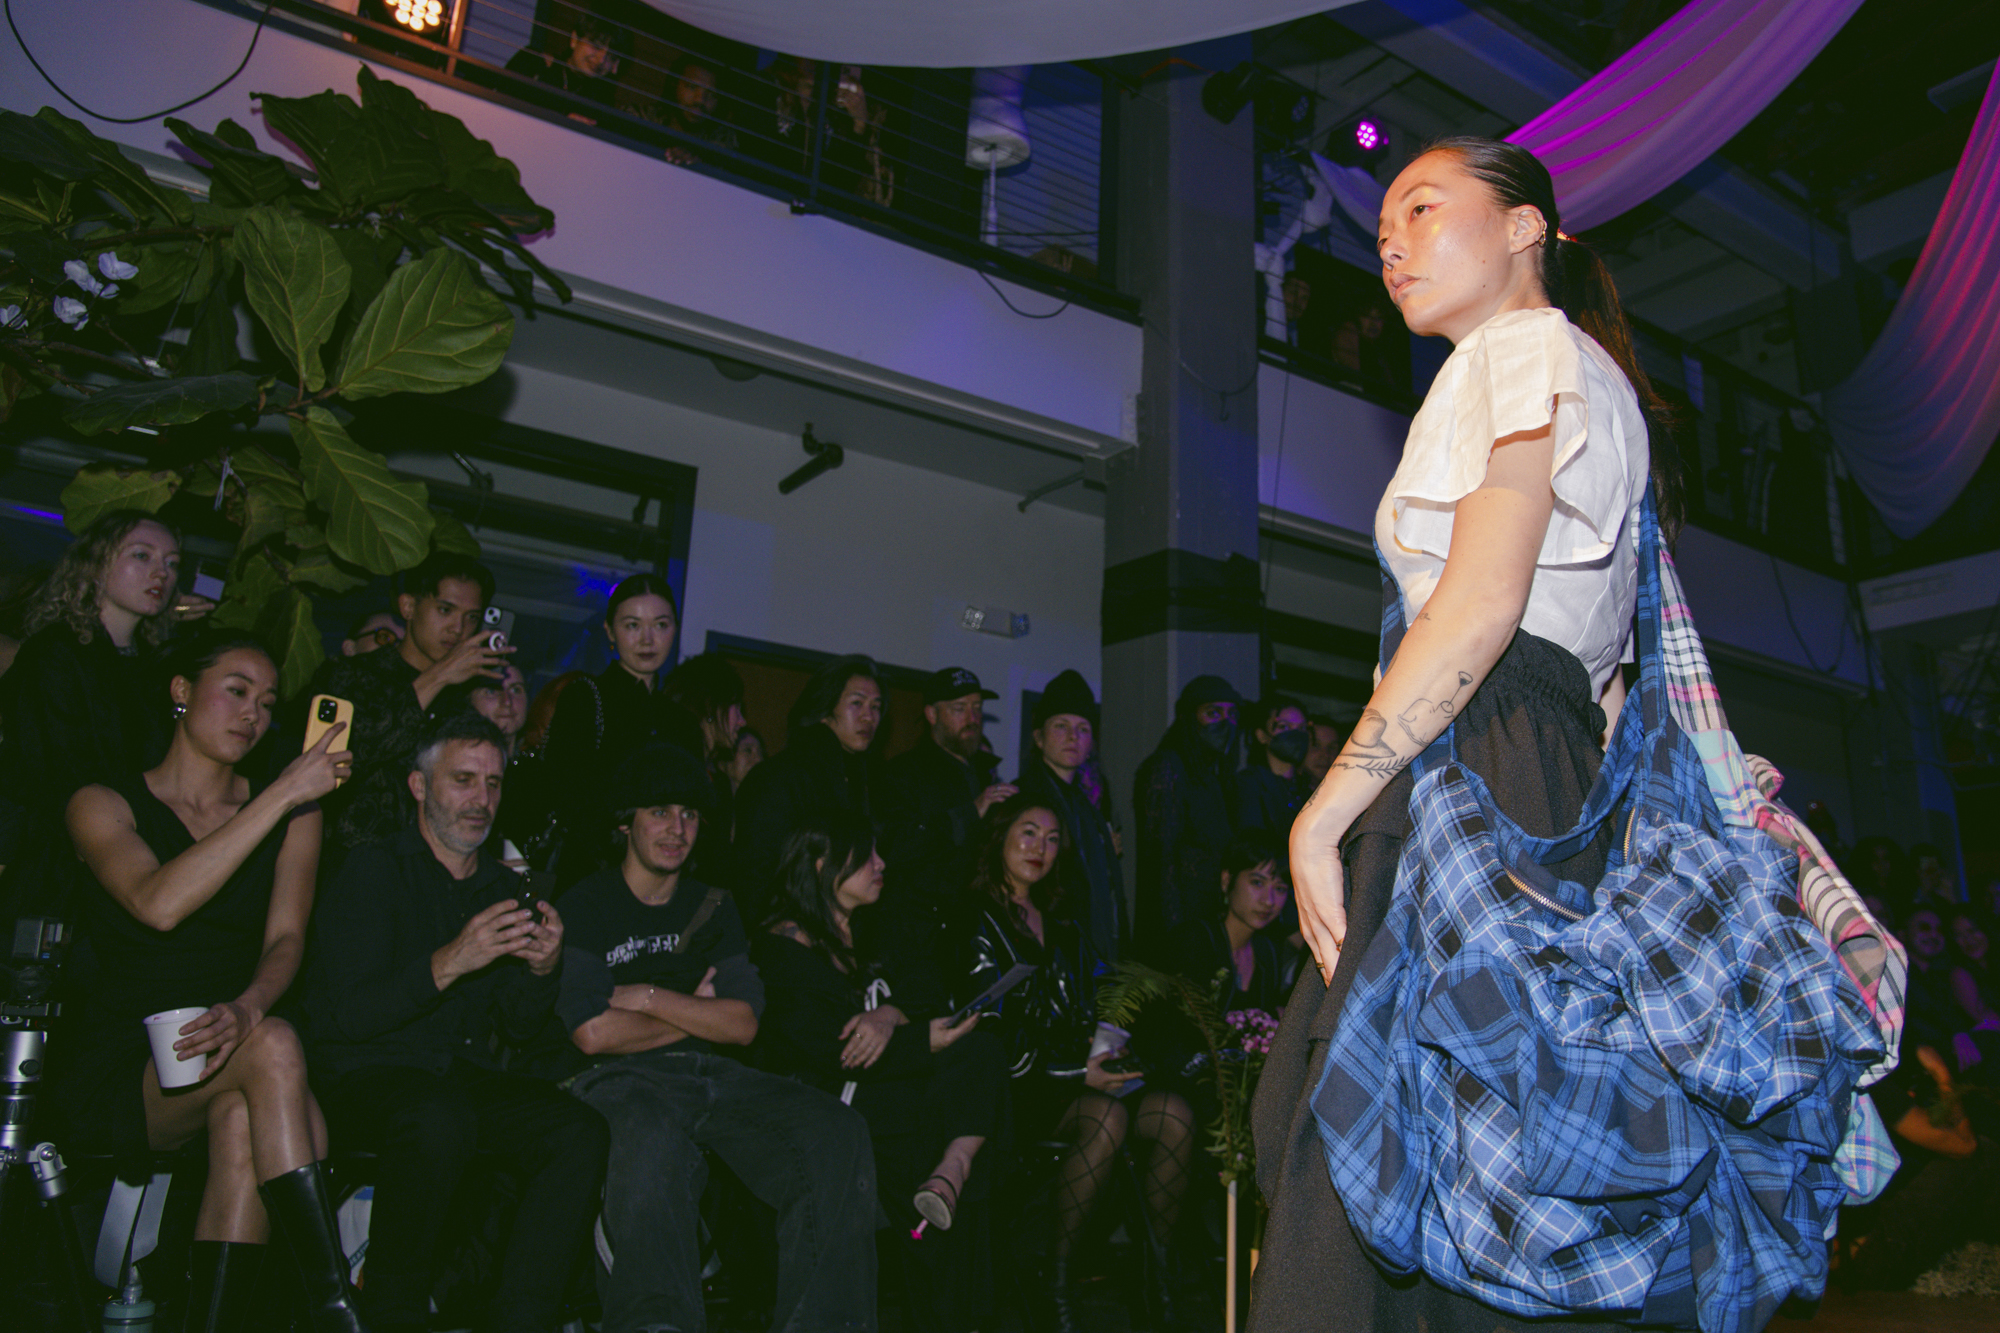 A model wearing a large bag stands in front of a large group of people.